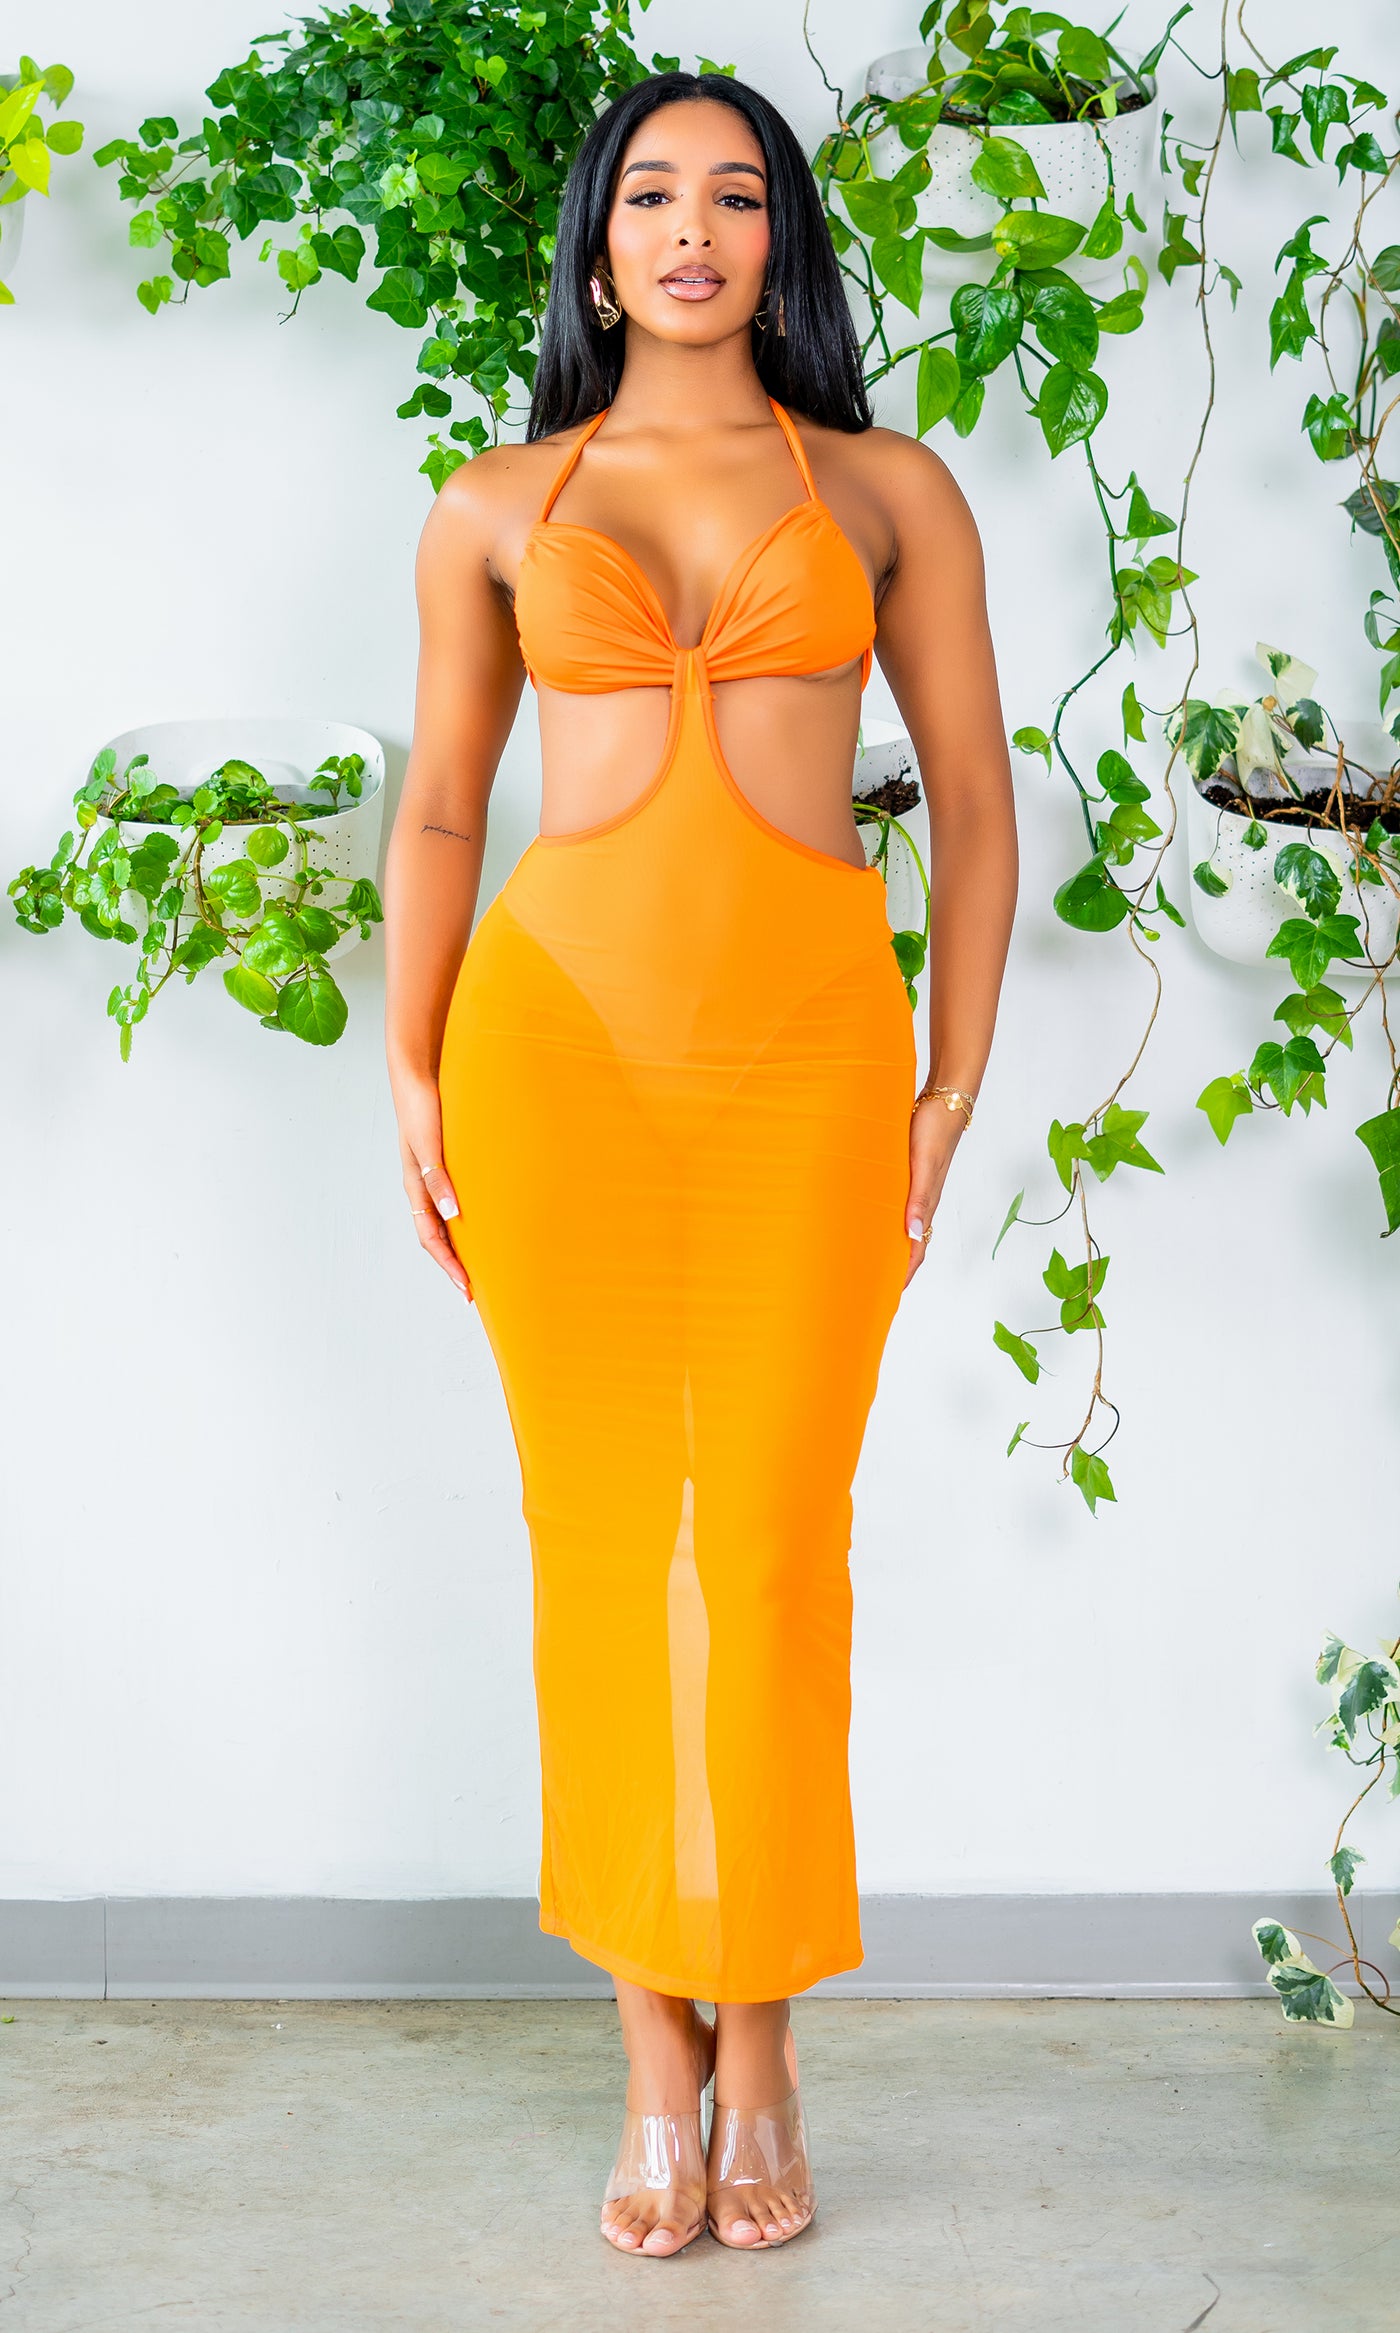 Tap In | Cutout Mesh Dress - Orange - Cutely Covered